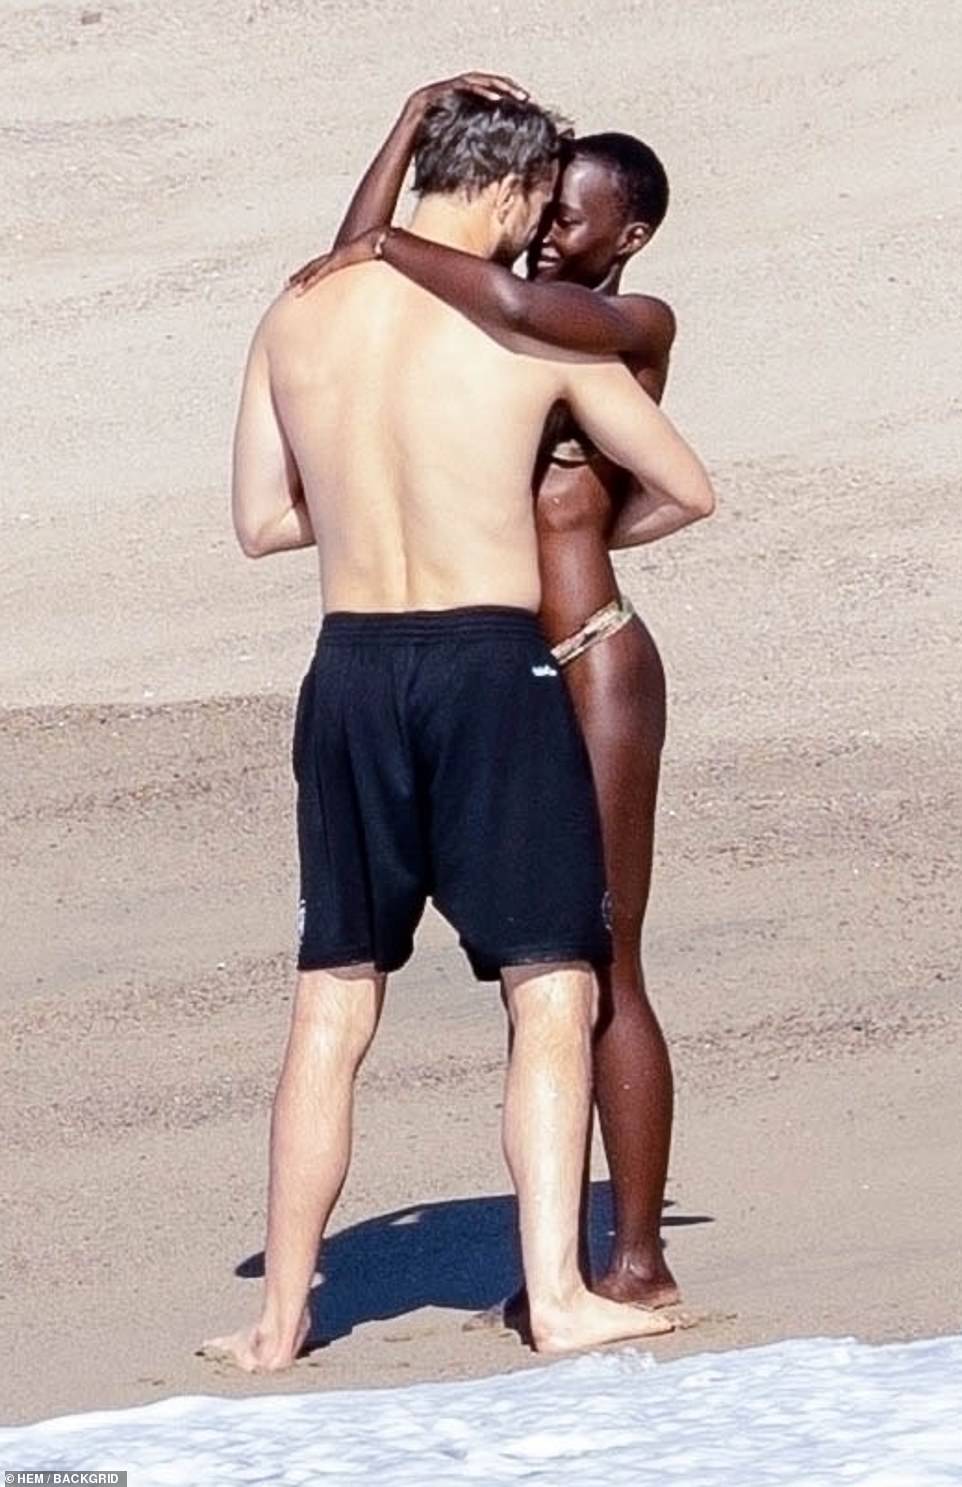 Joshua Jackson and Lupita Nyong'o couldn't keep their hands off each other during their getaway to Mexico this week.